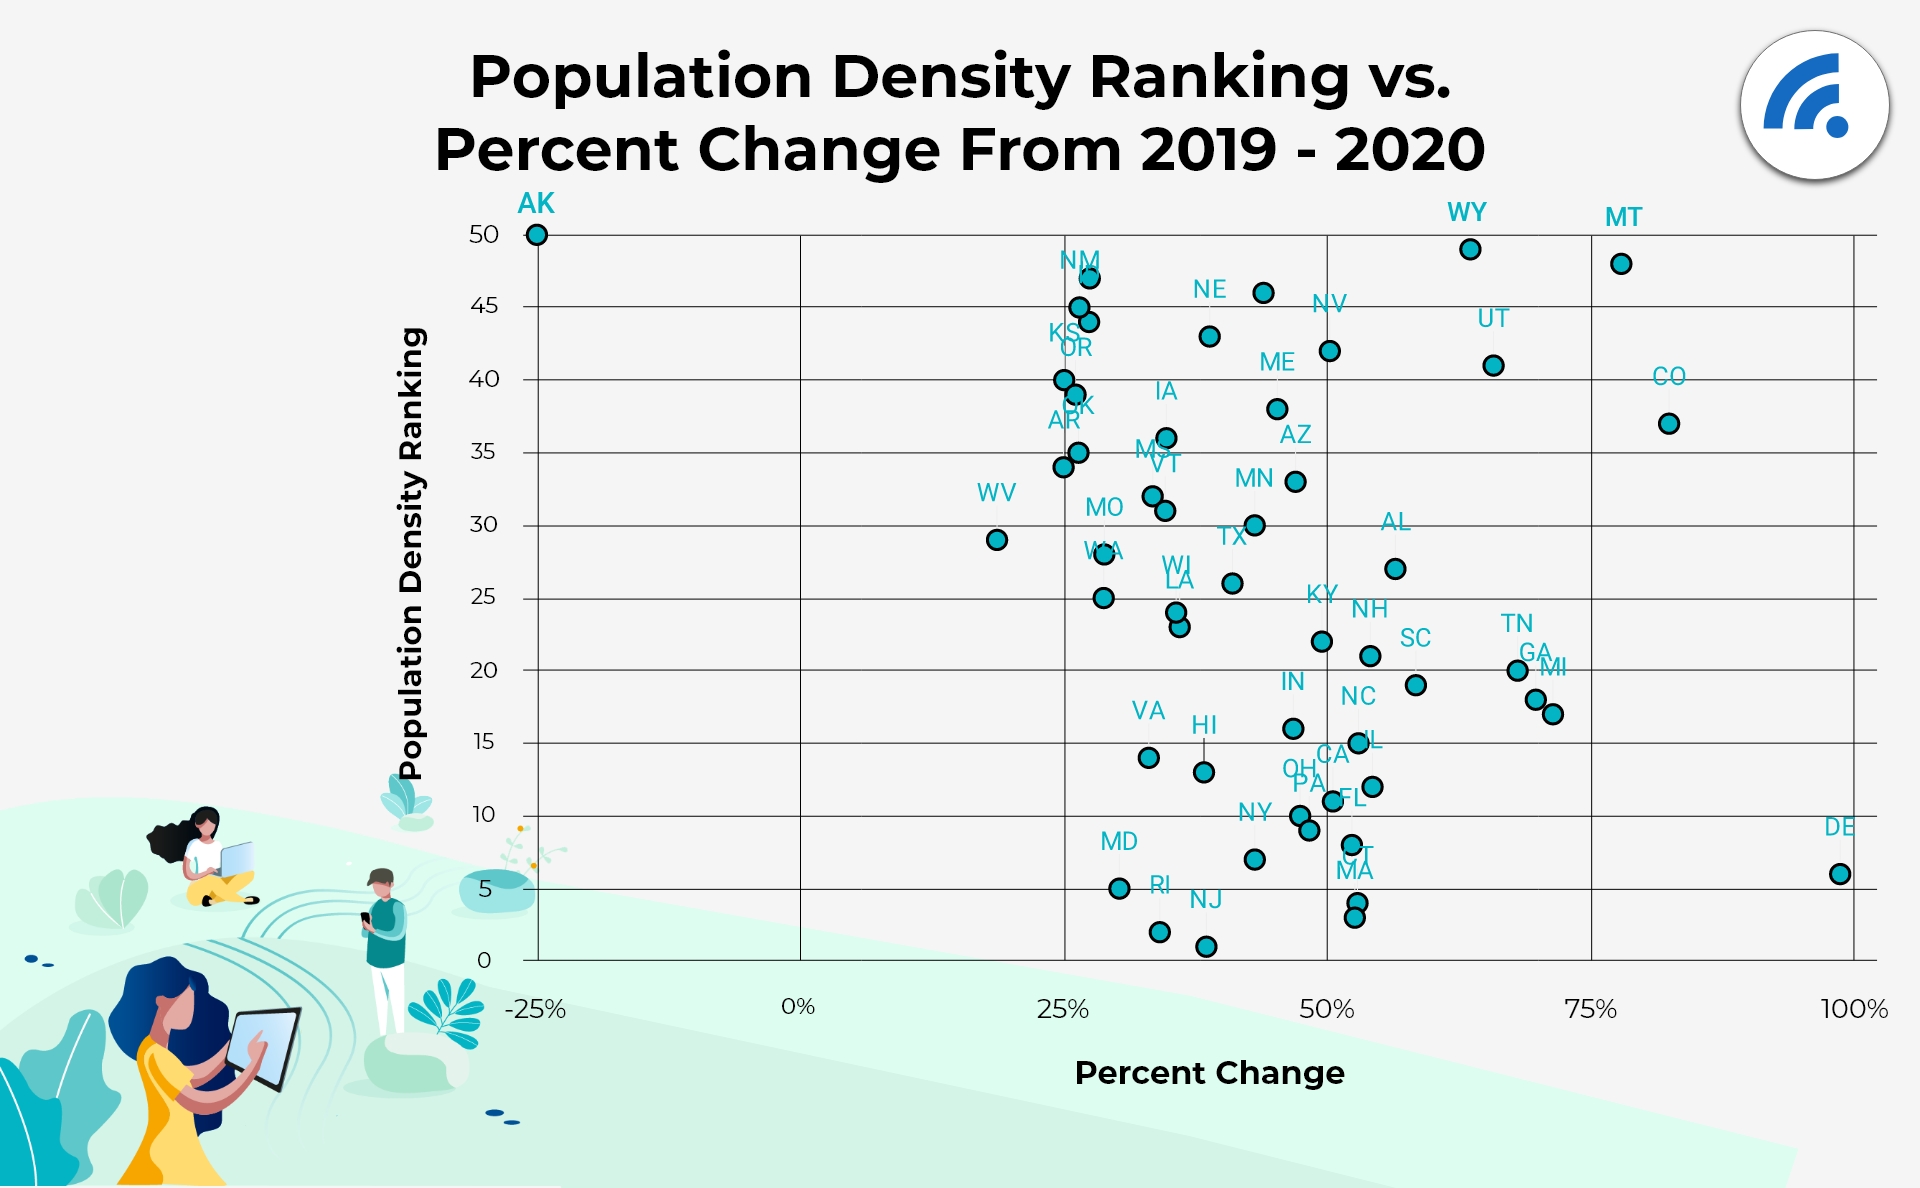 Population Density Ranking vs. Percent Change From 2019 to 2020